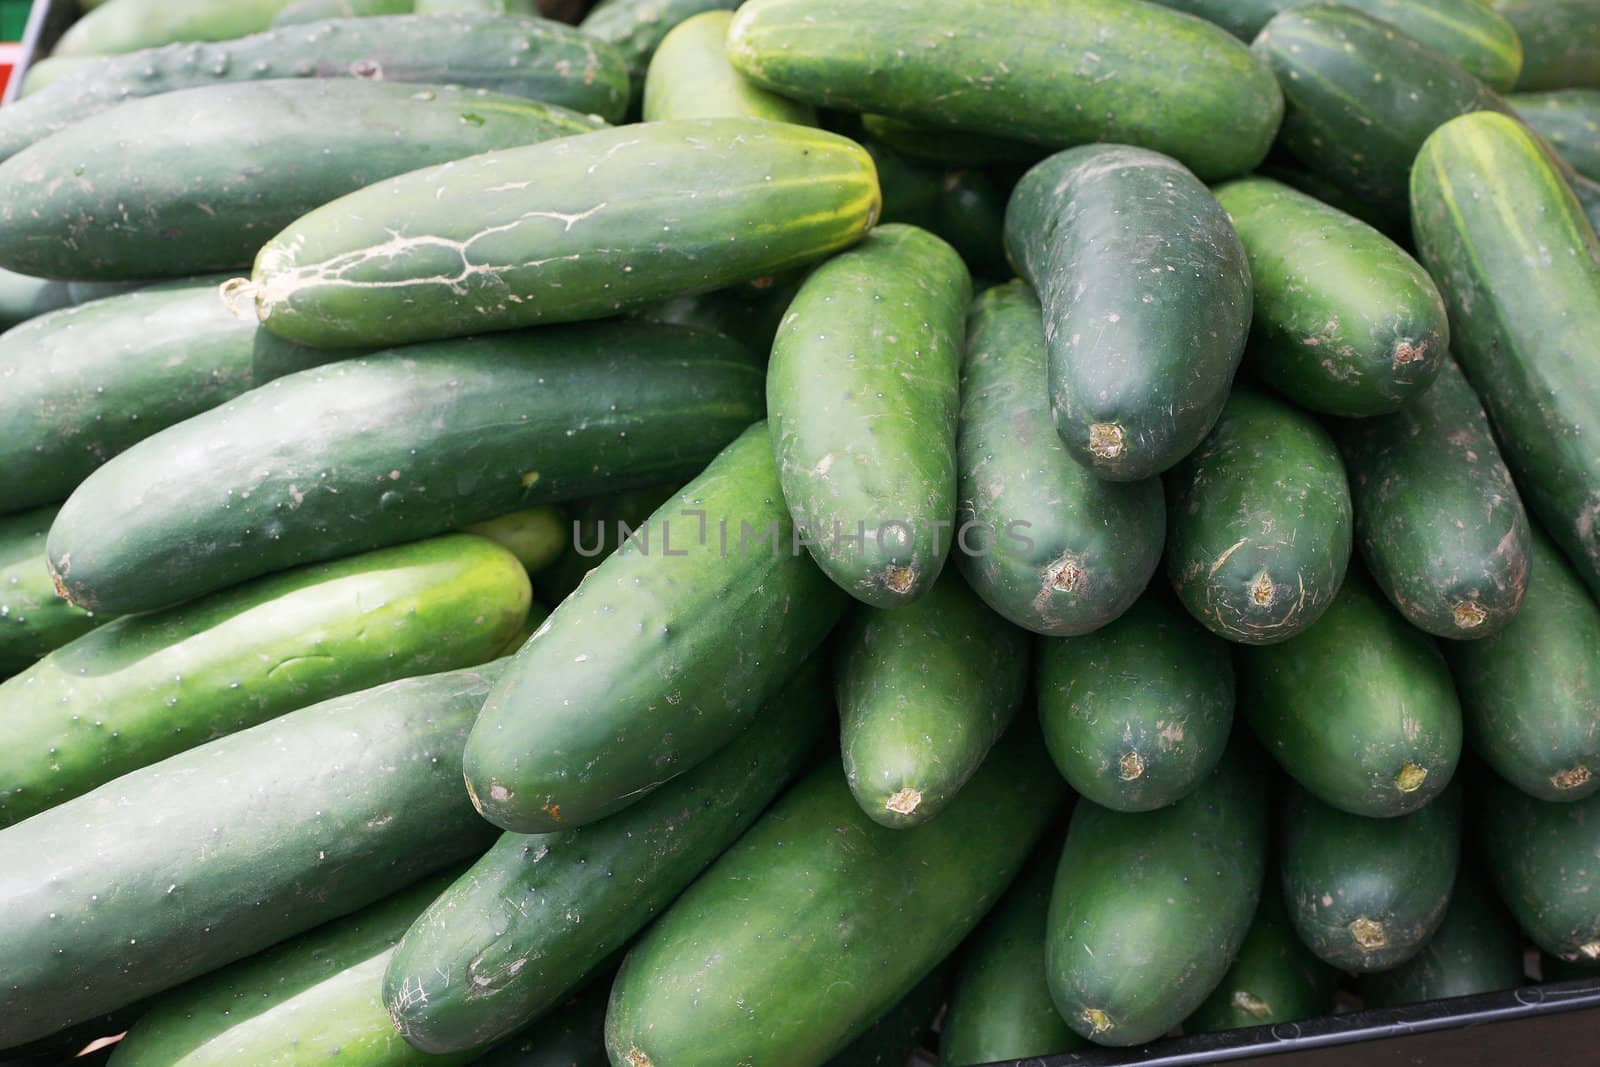 cucumbers bunched together for sale at market good as a background